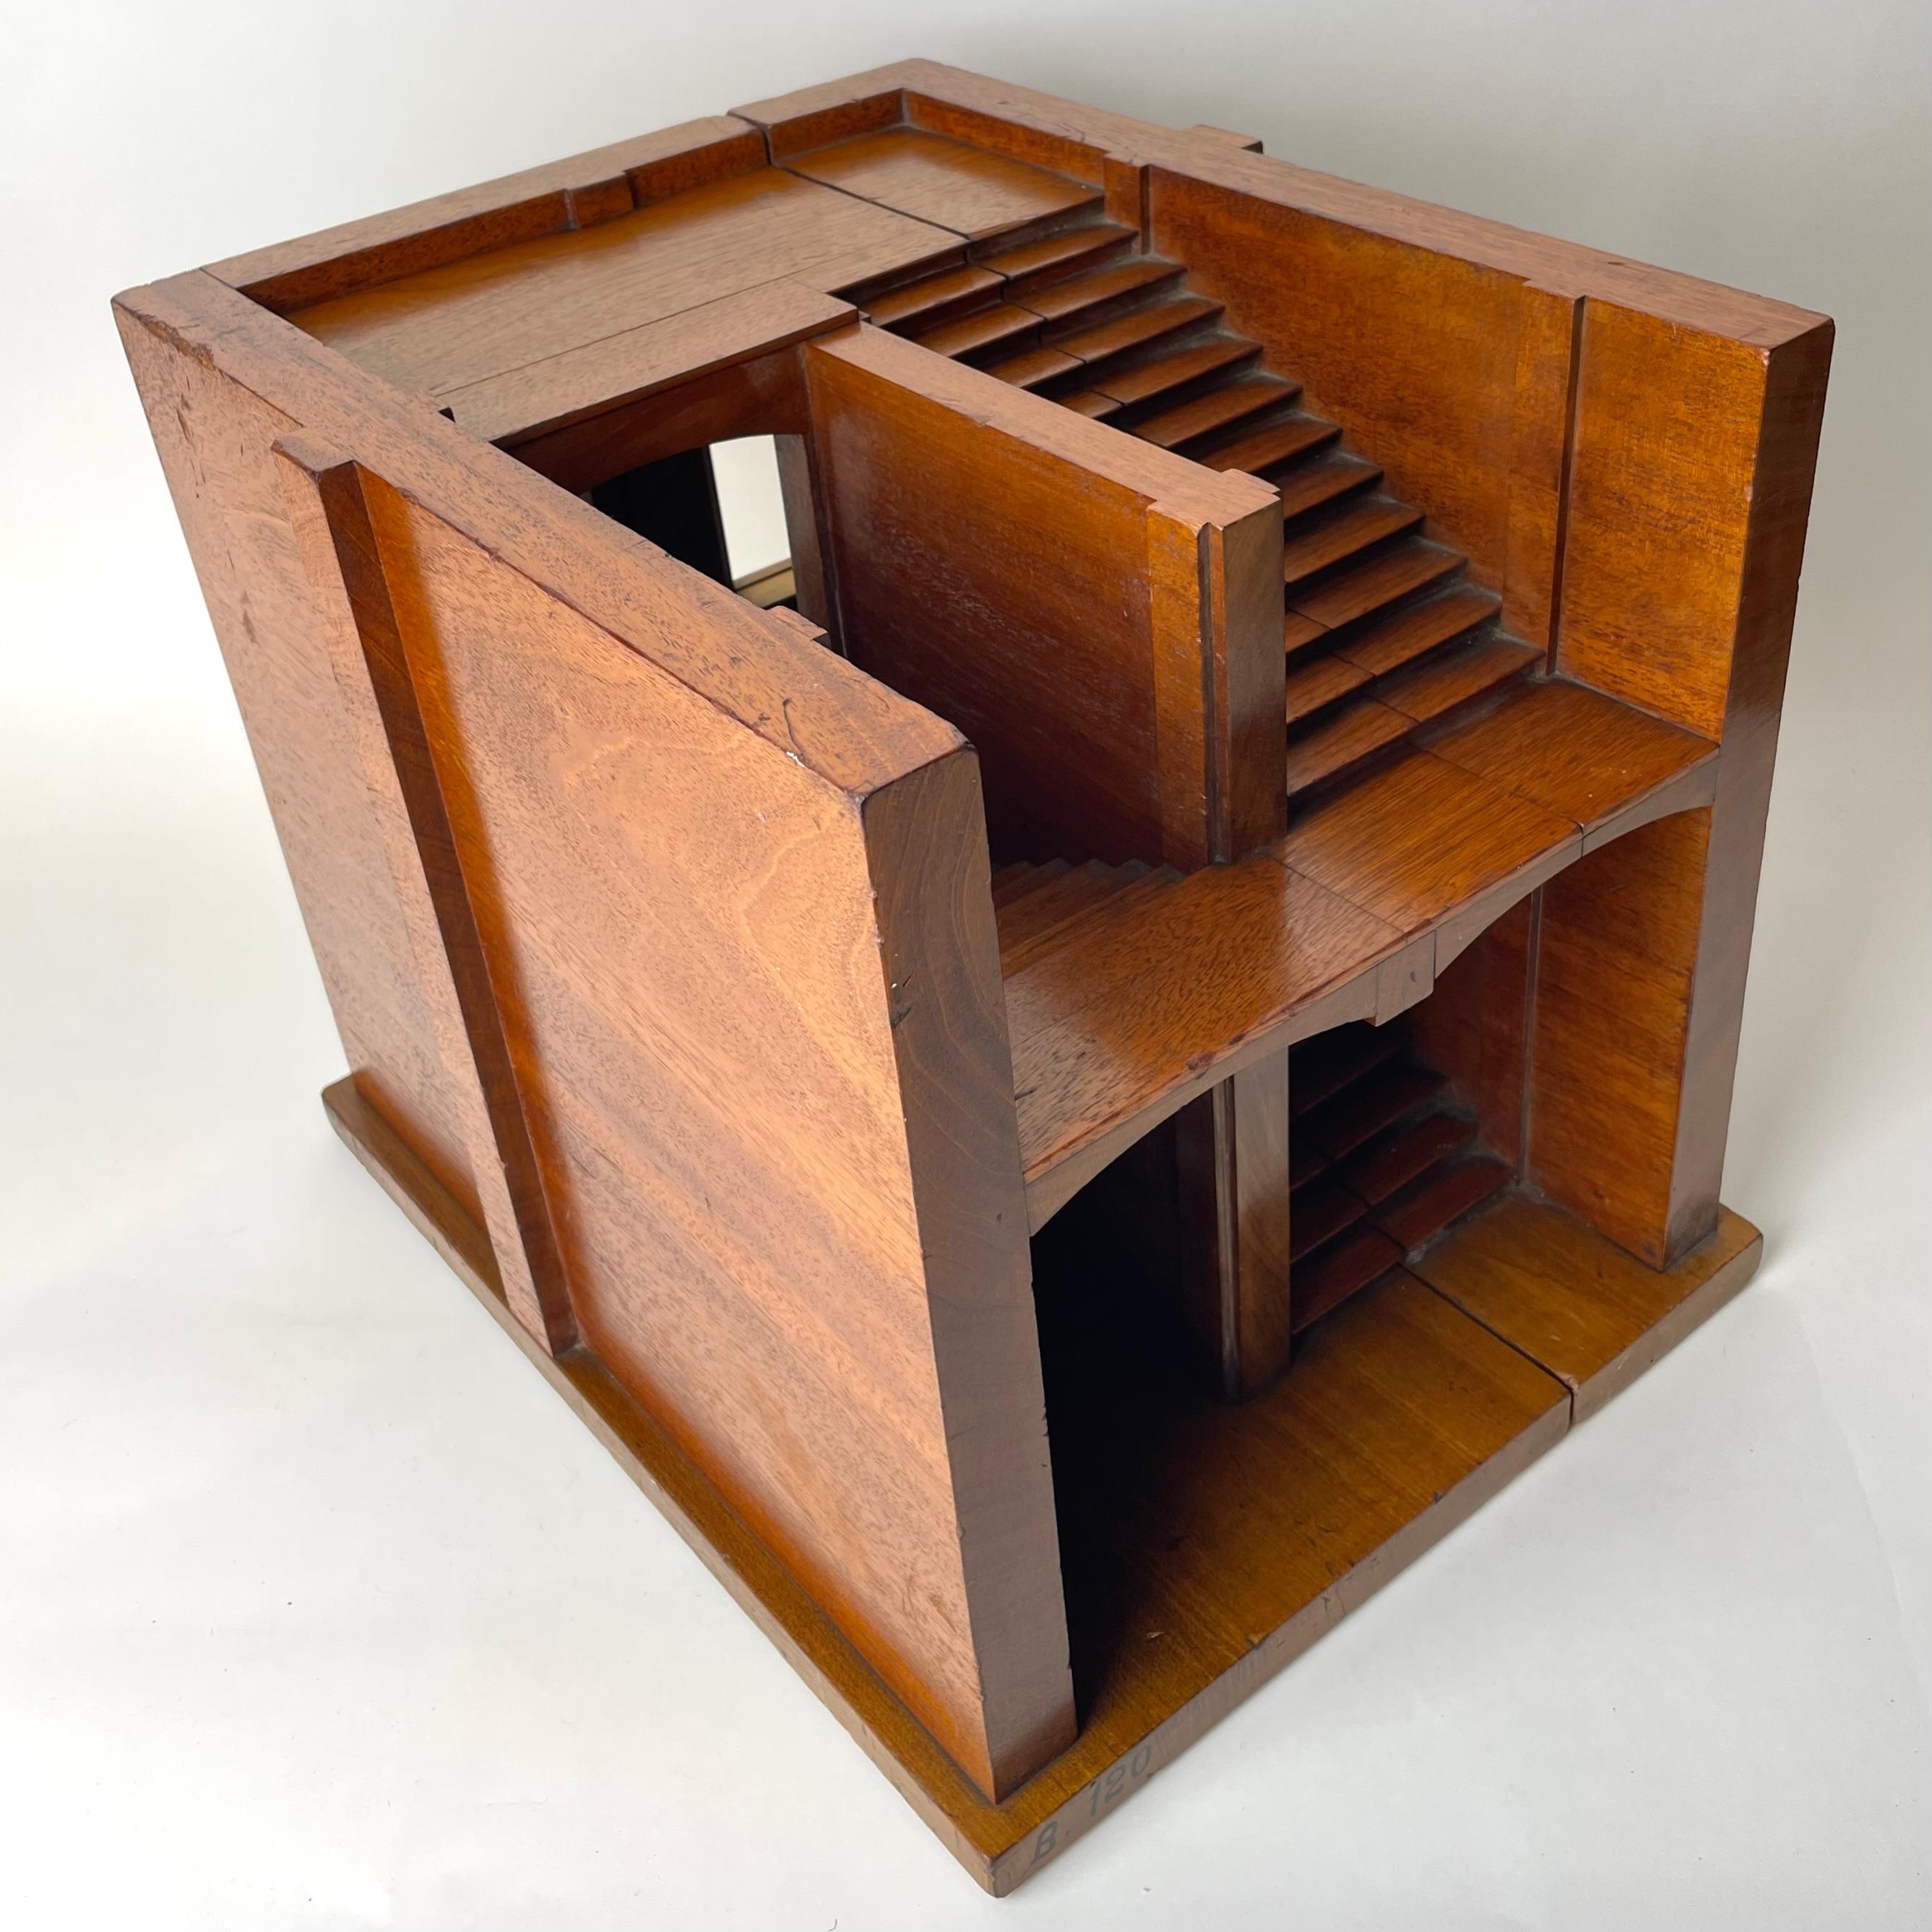 Mahogany Staircase Section Architectural Model, Late 19th/Early 20th C England. For Sale 2